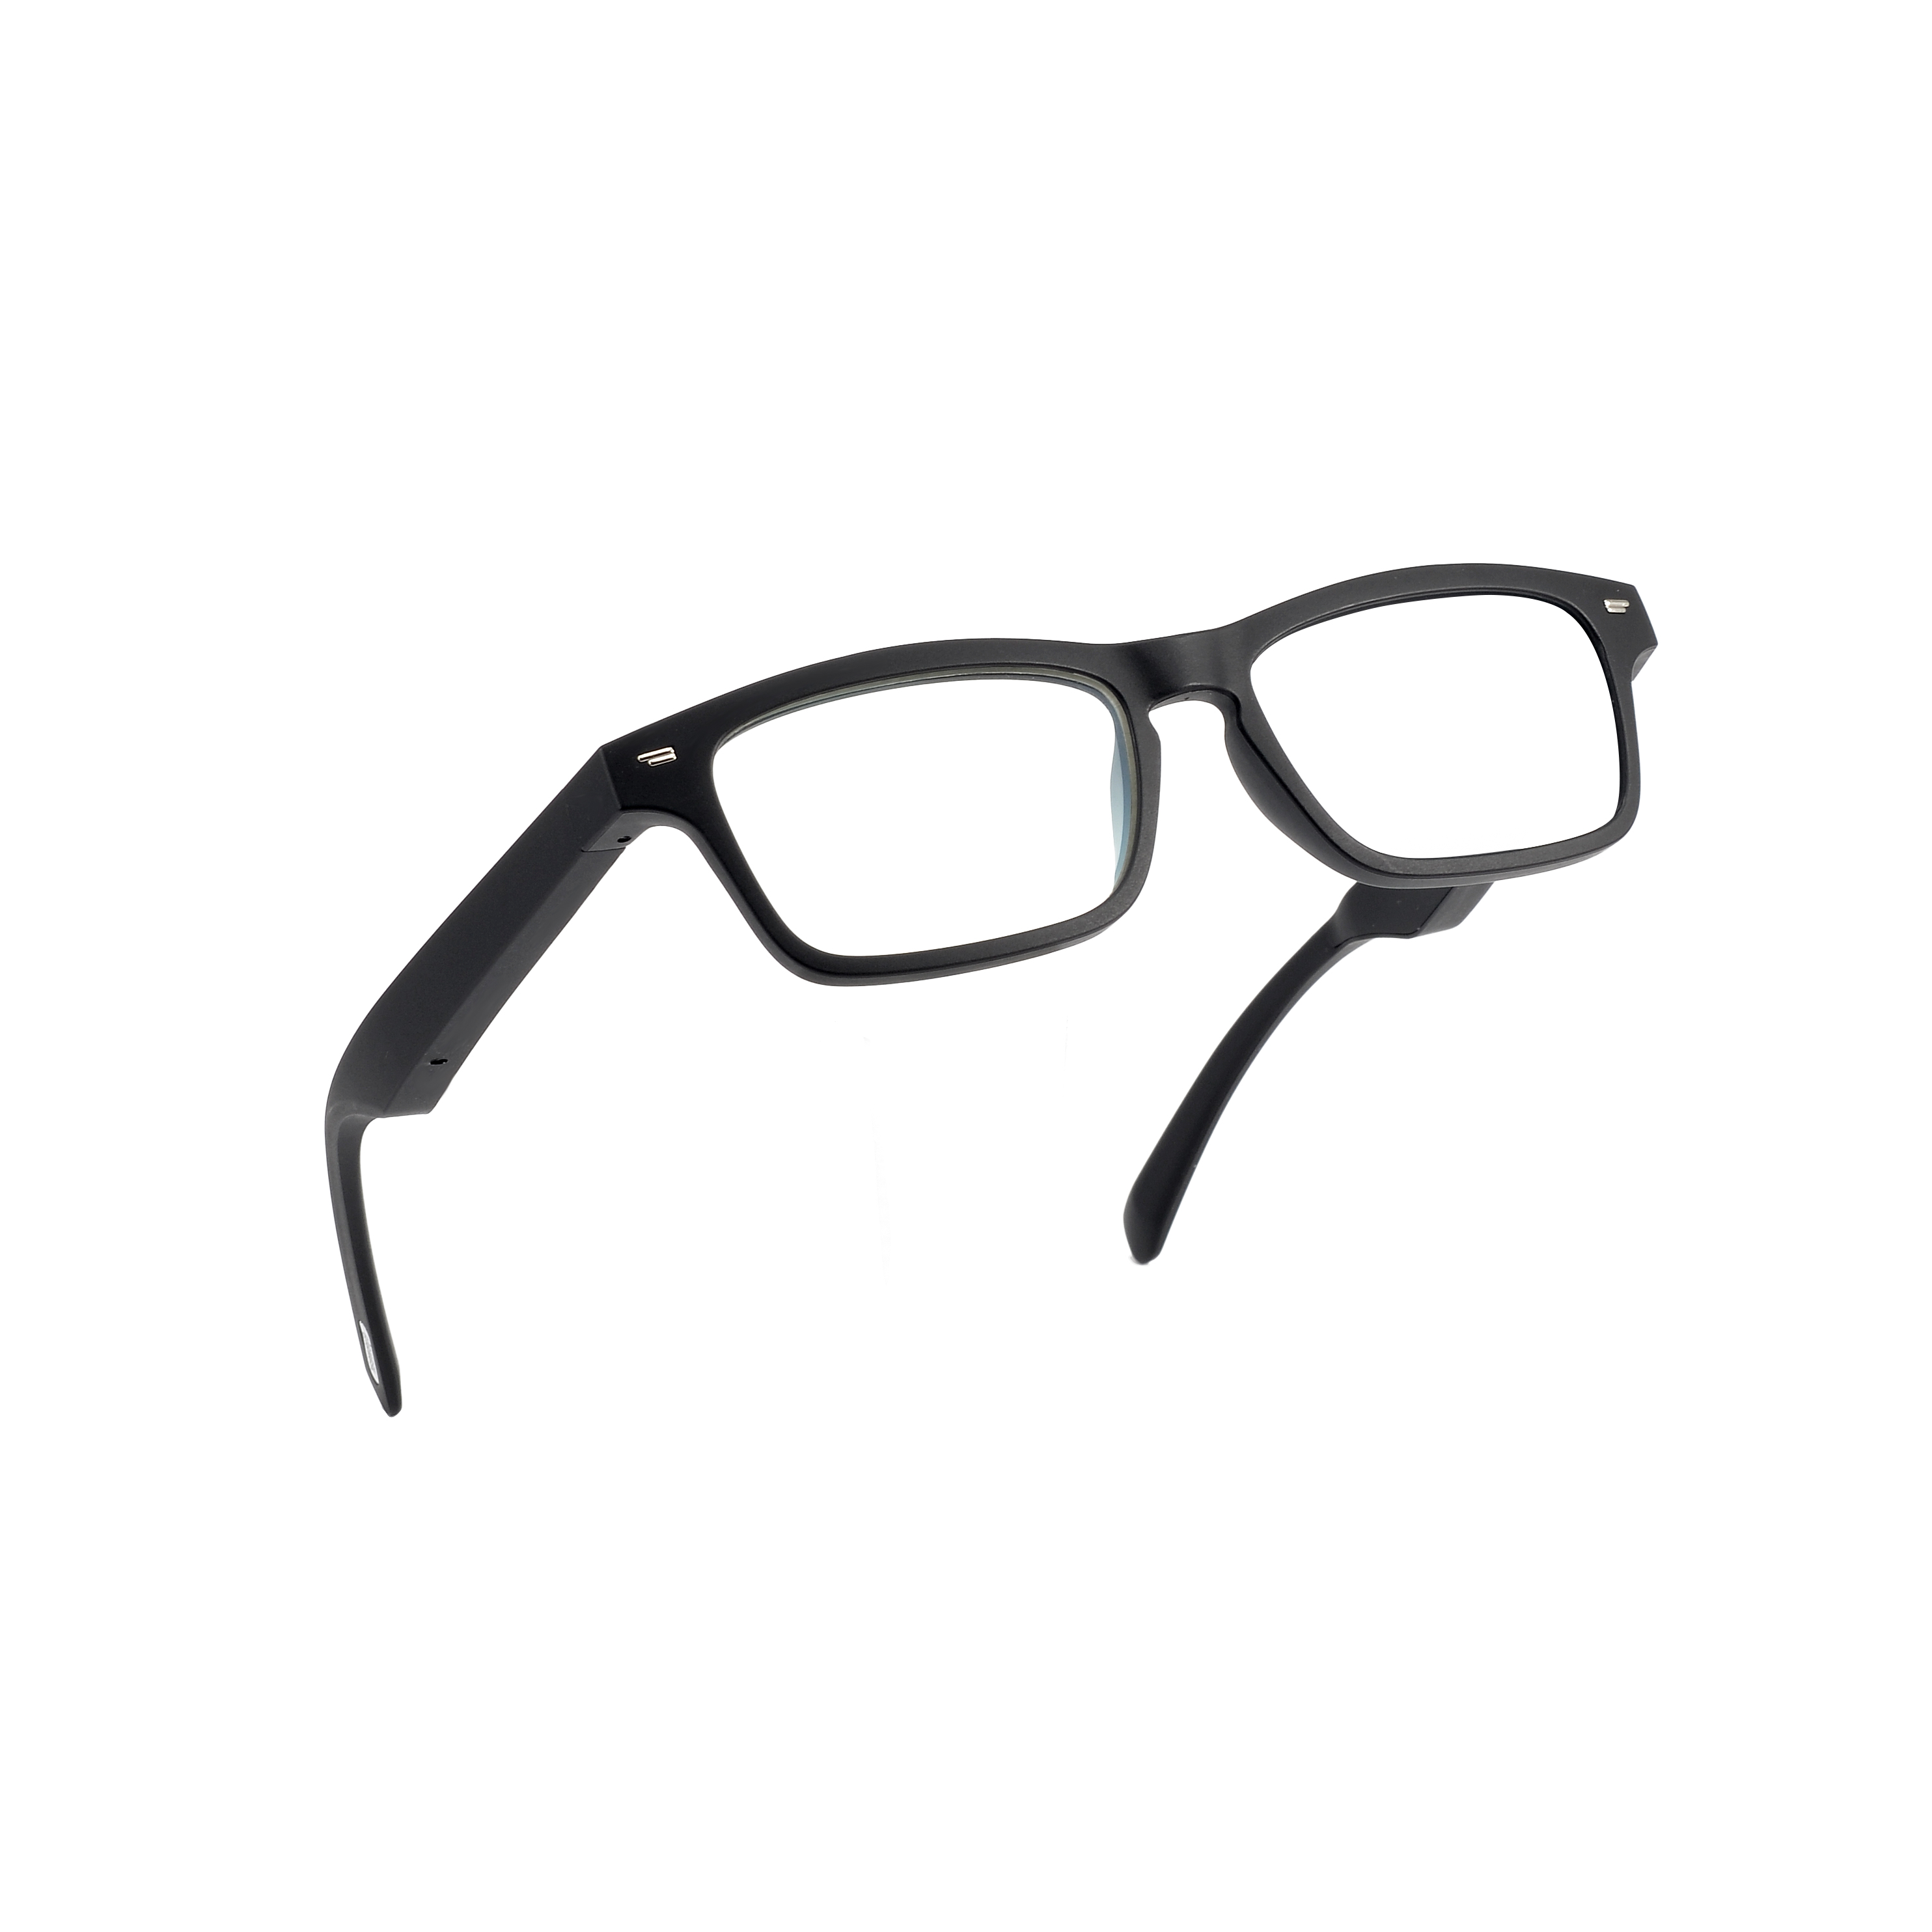 Smart Glasses Featured Image